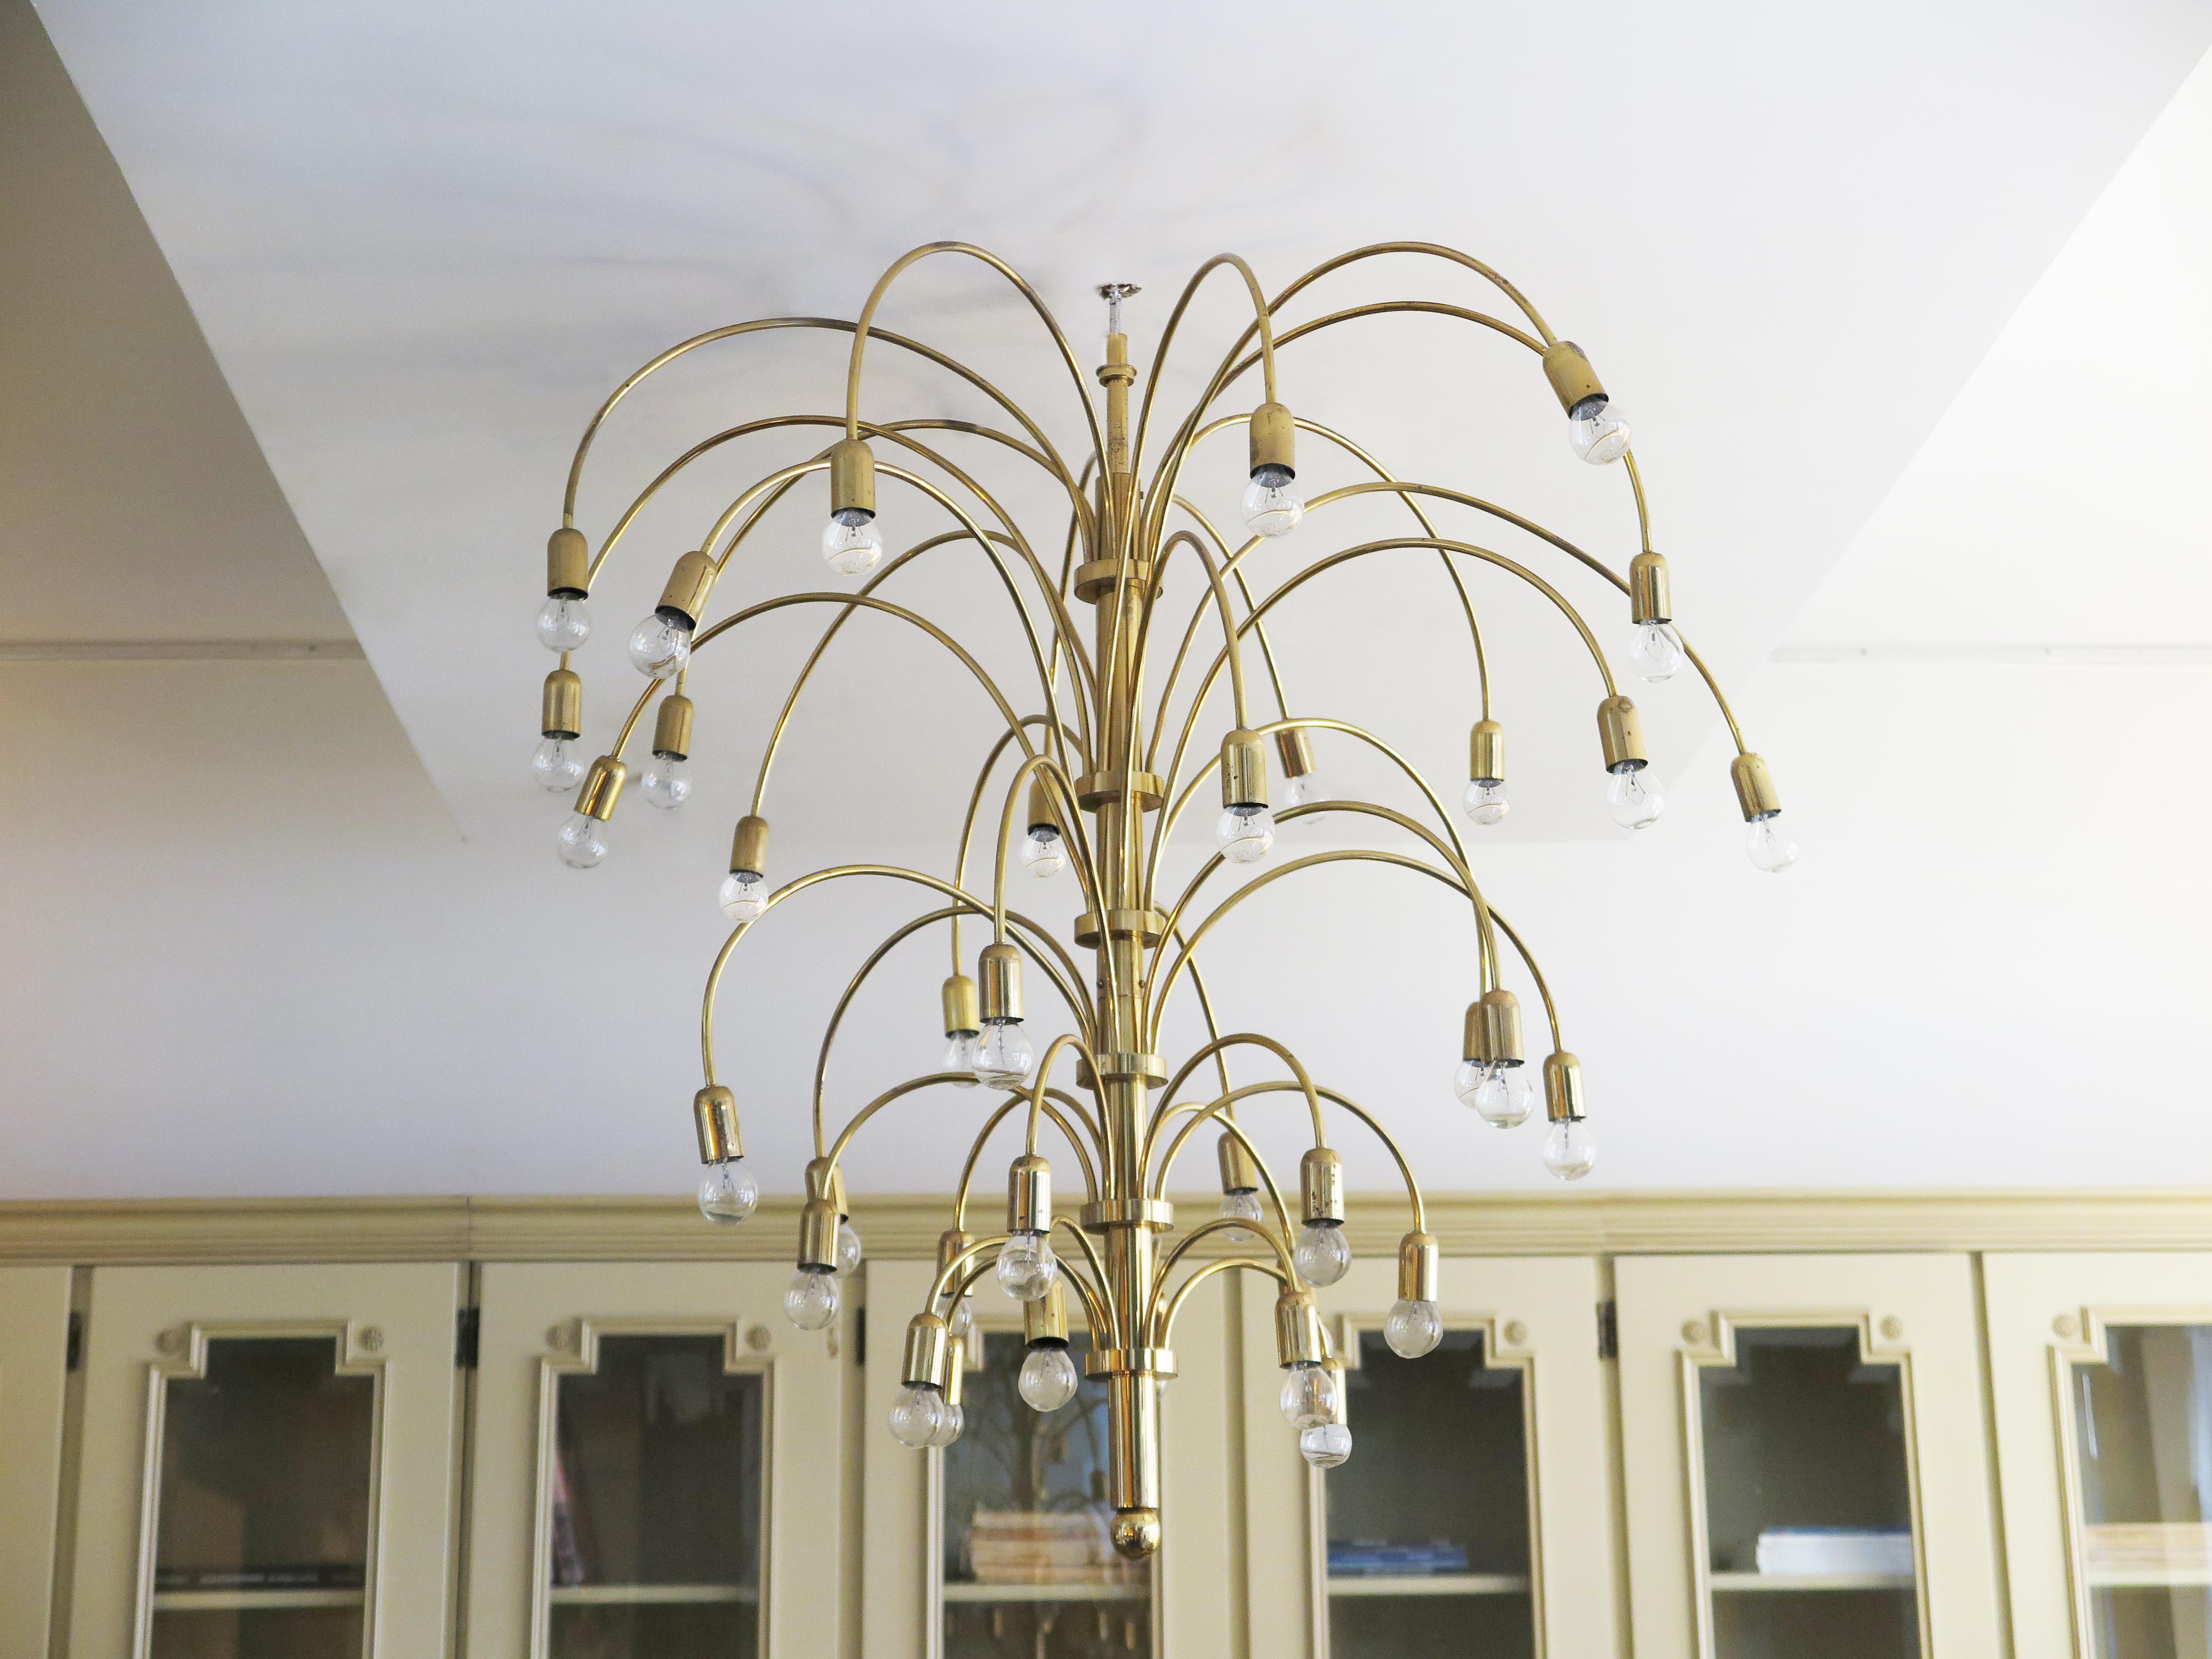 French Mid-Century brass chandelier with lights bursting from the center stem like a firework. This beautiful chandelier holds 36 globe bulbs that sporadically tier down. (Any candelabra base bulb can be used).